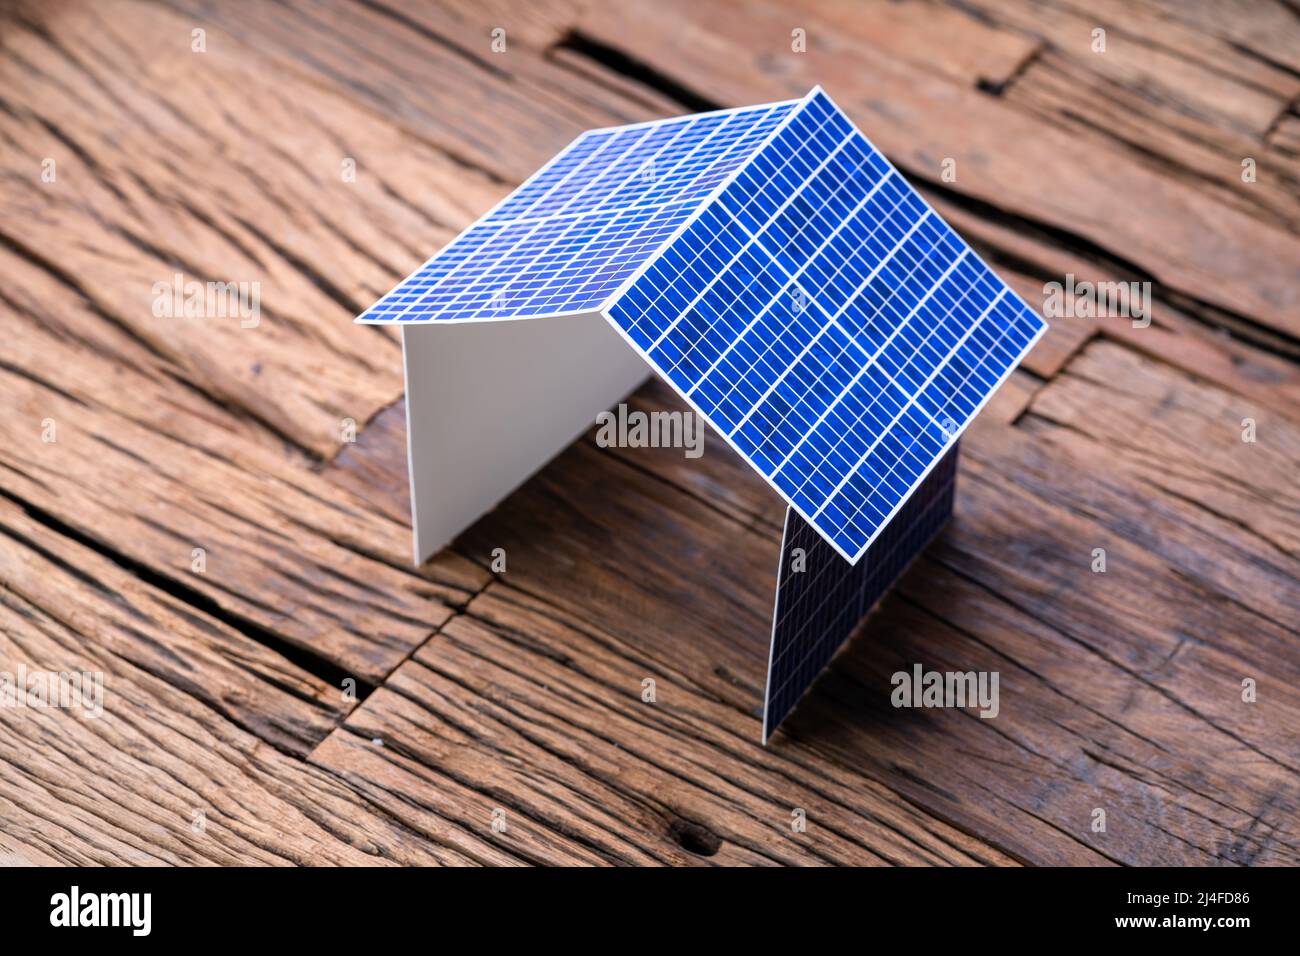 Solar Panel House Roof Real Estate Investment Stock Photo